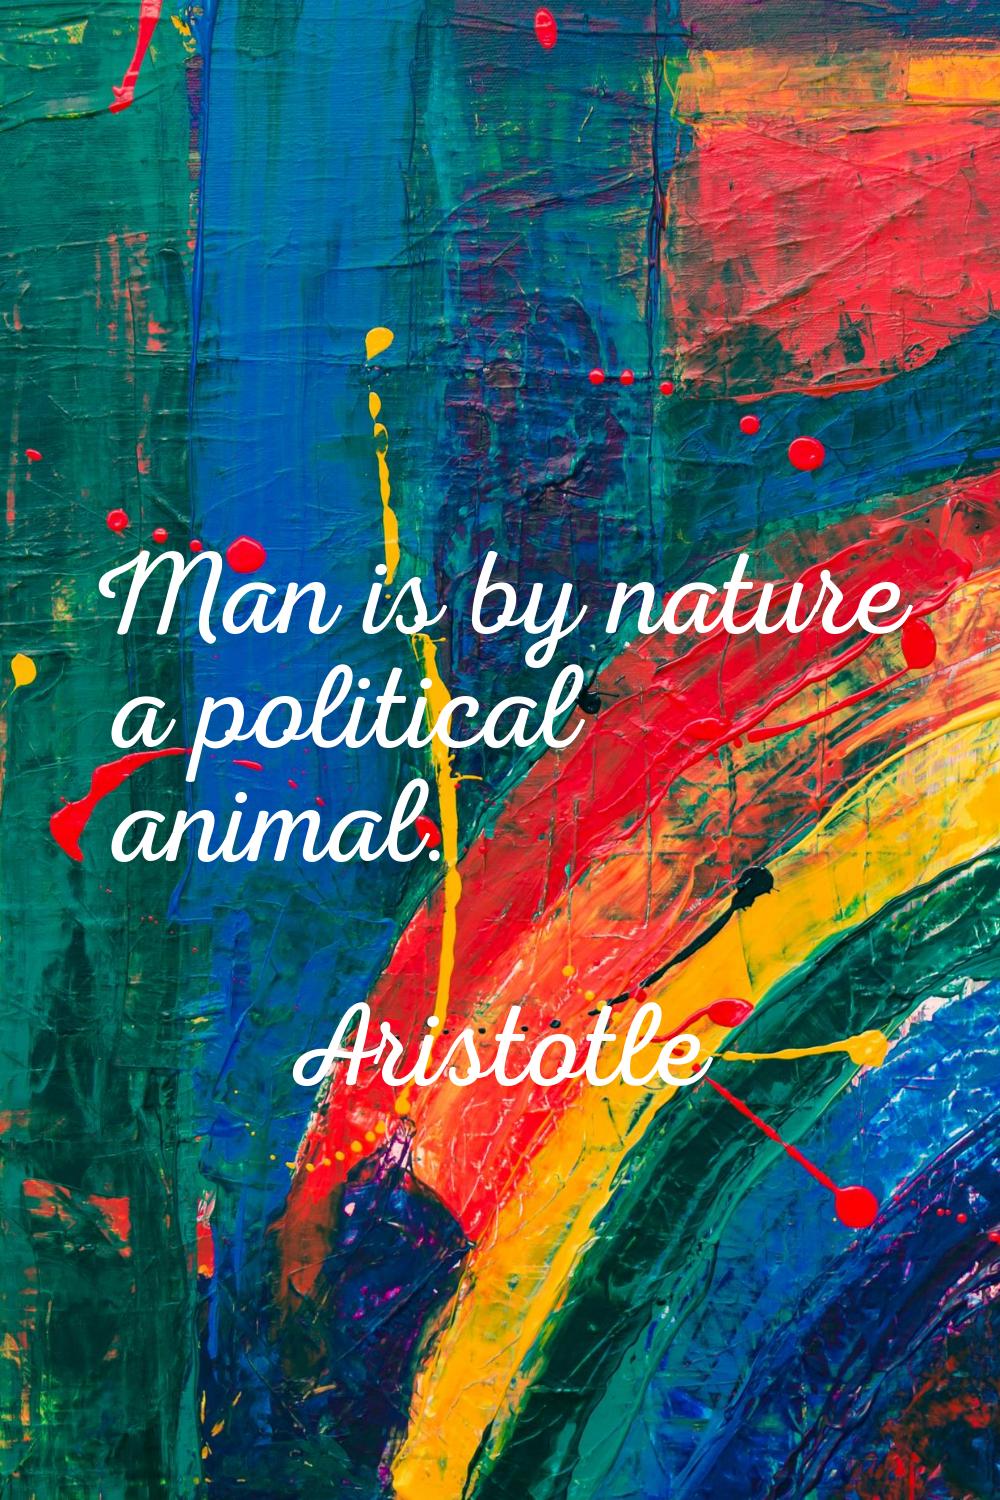 Man is by nature a political animal.